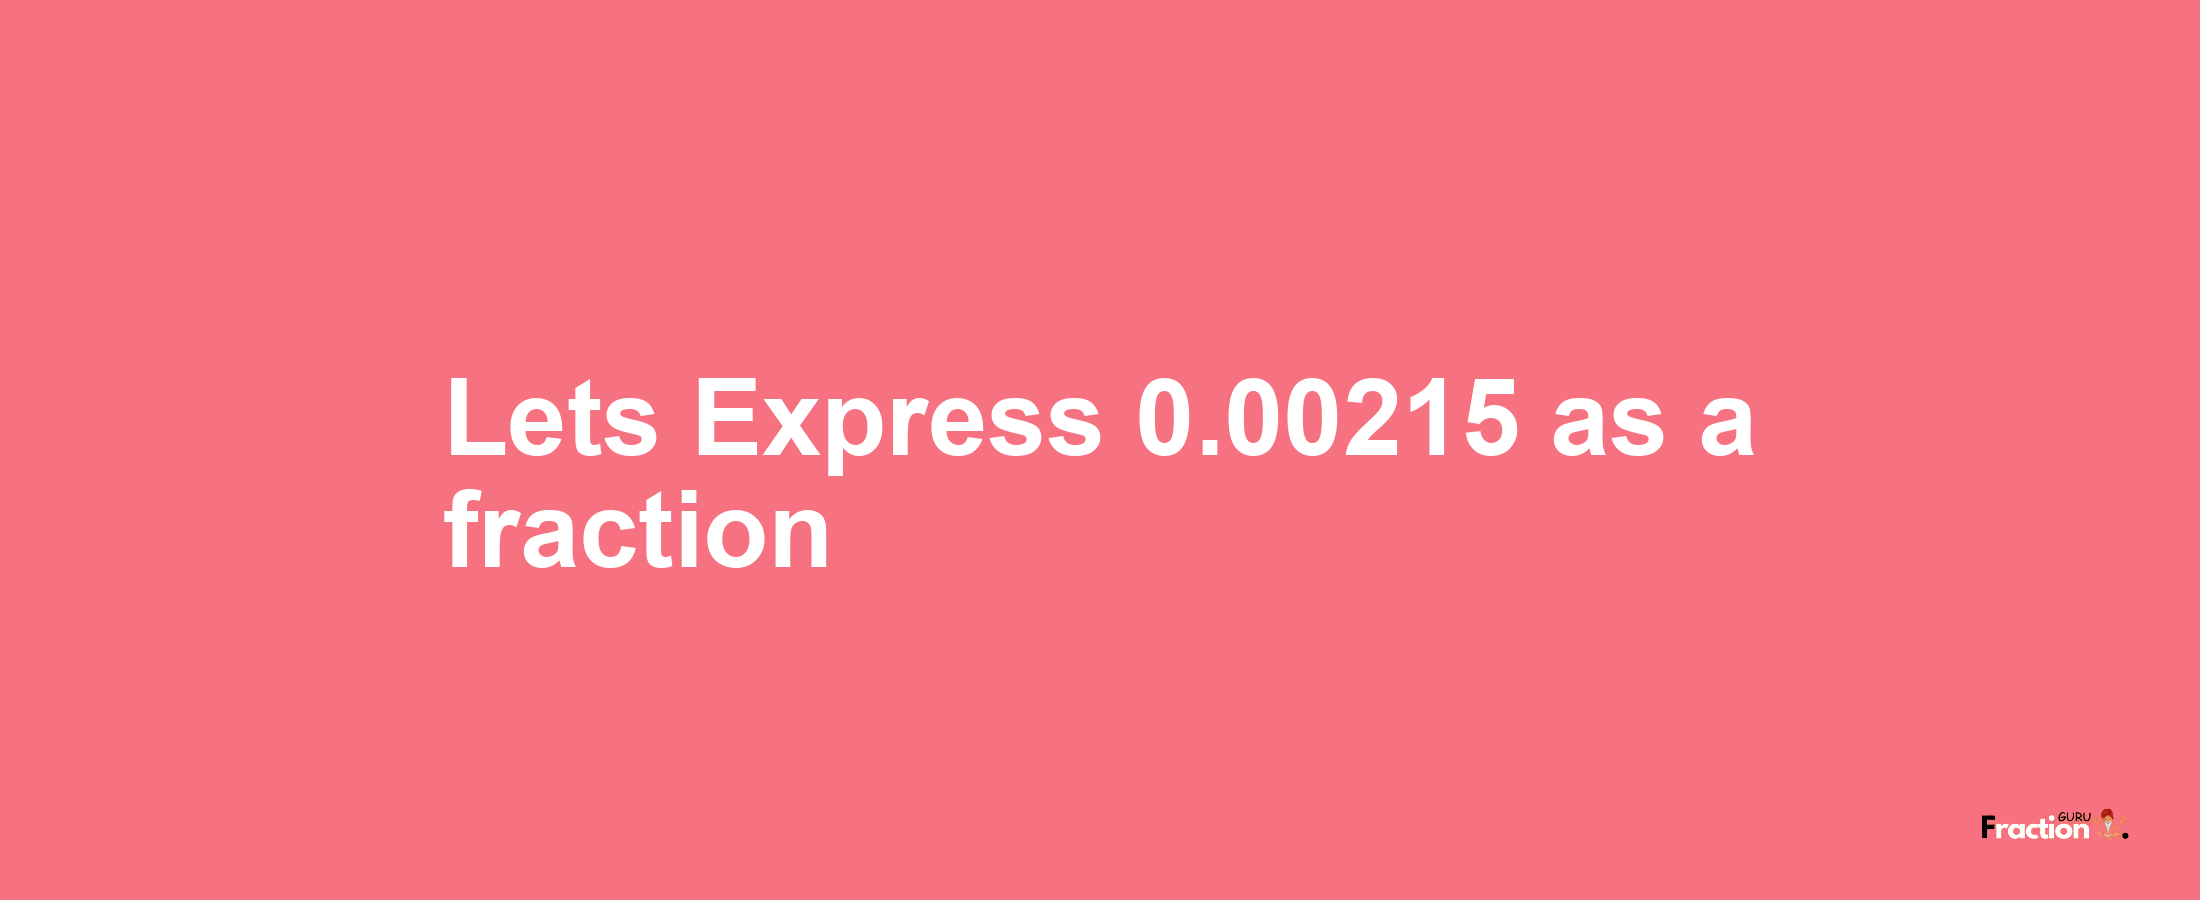 Lets Express 0.00215 as afraction